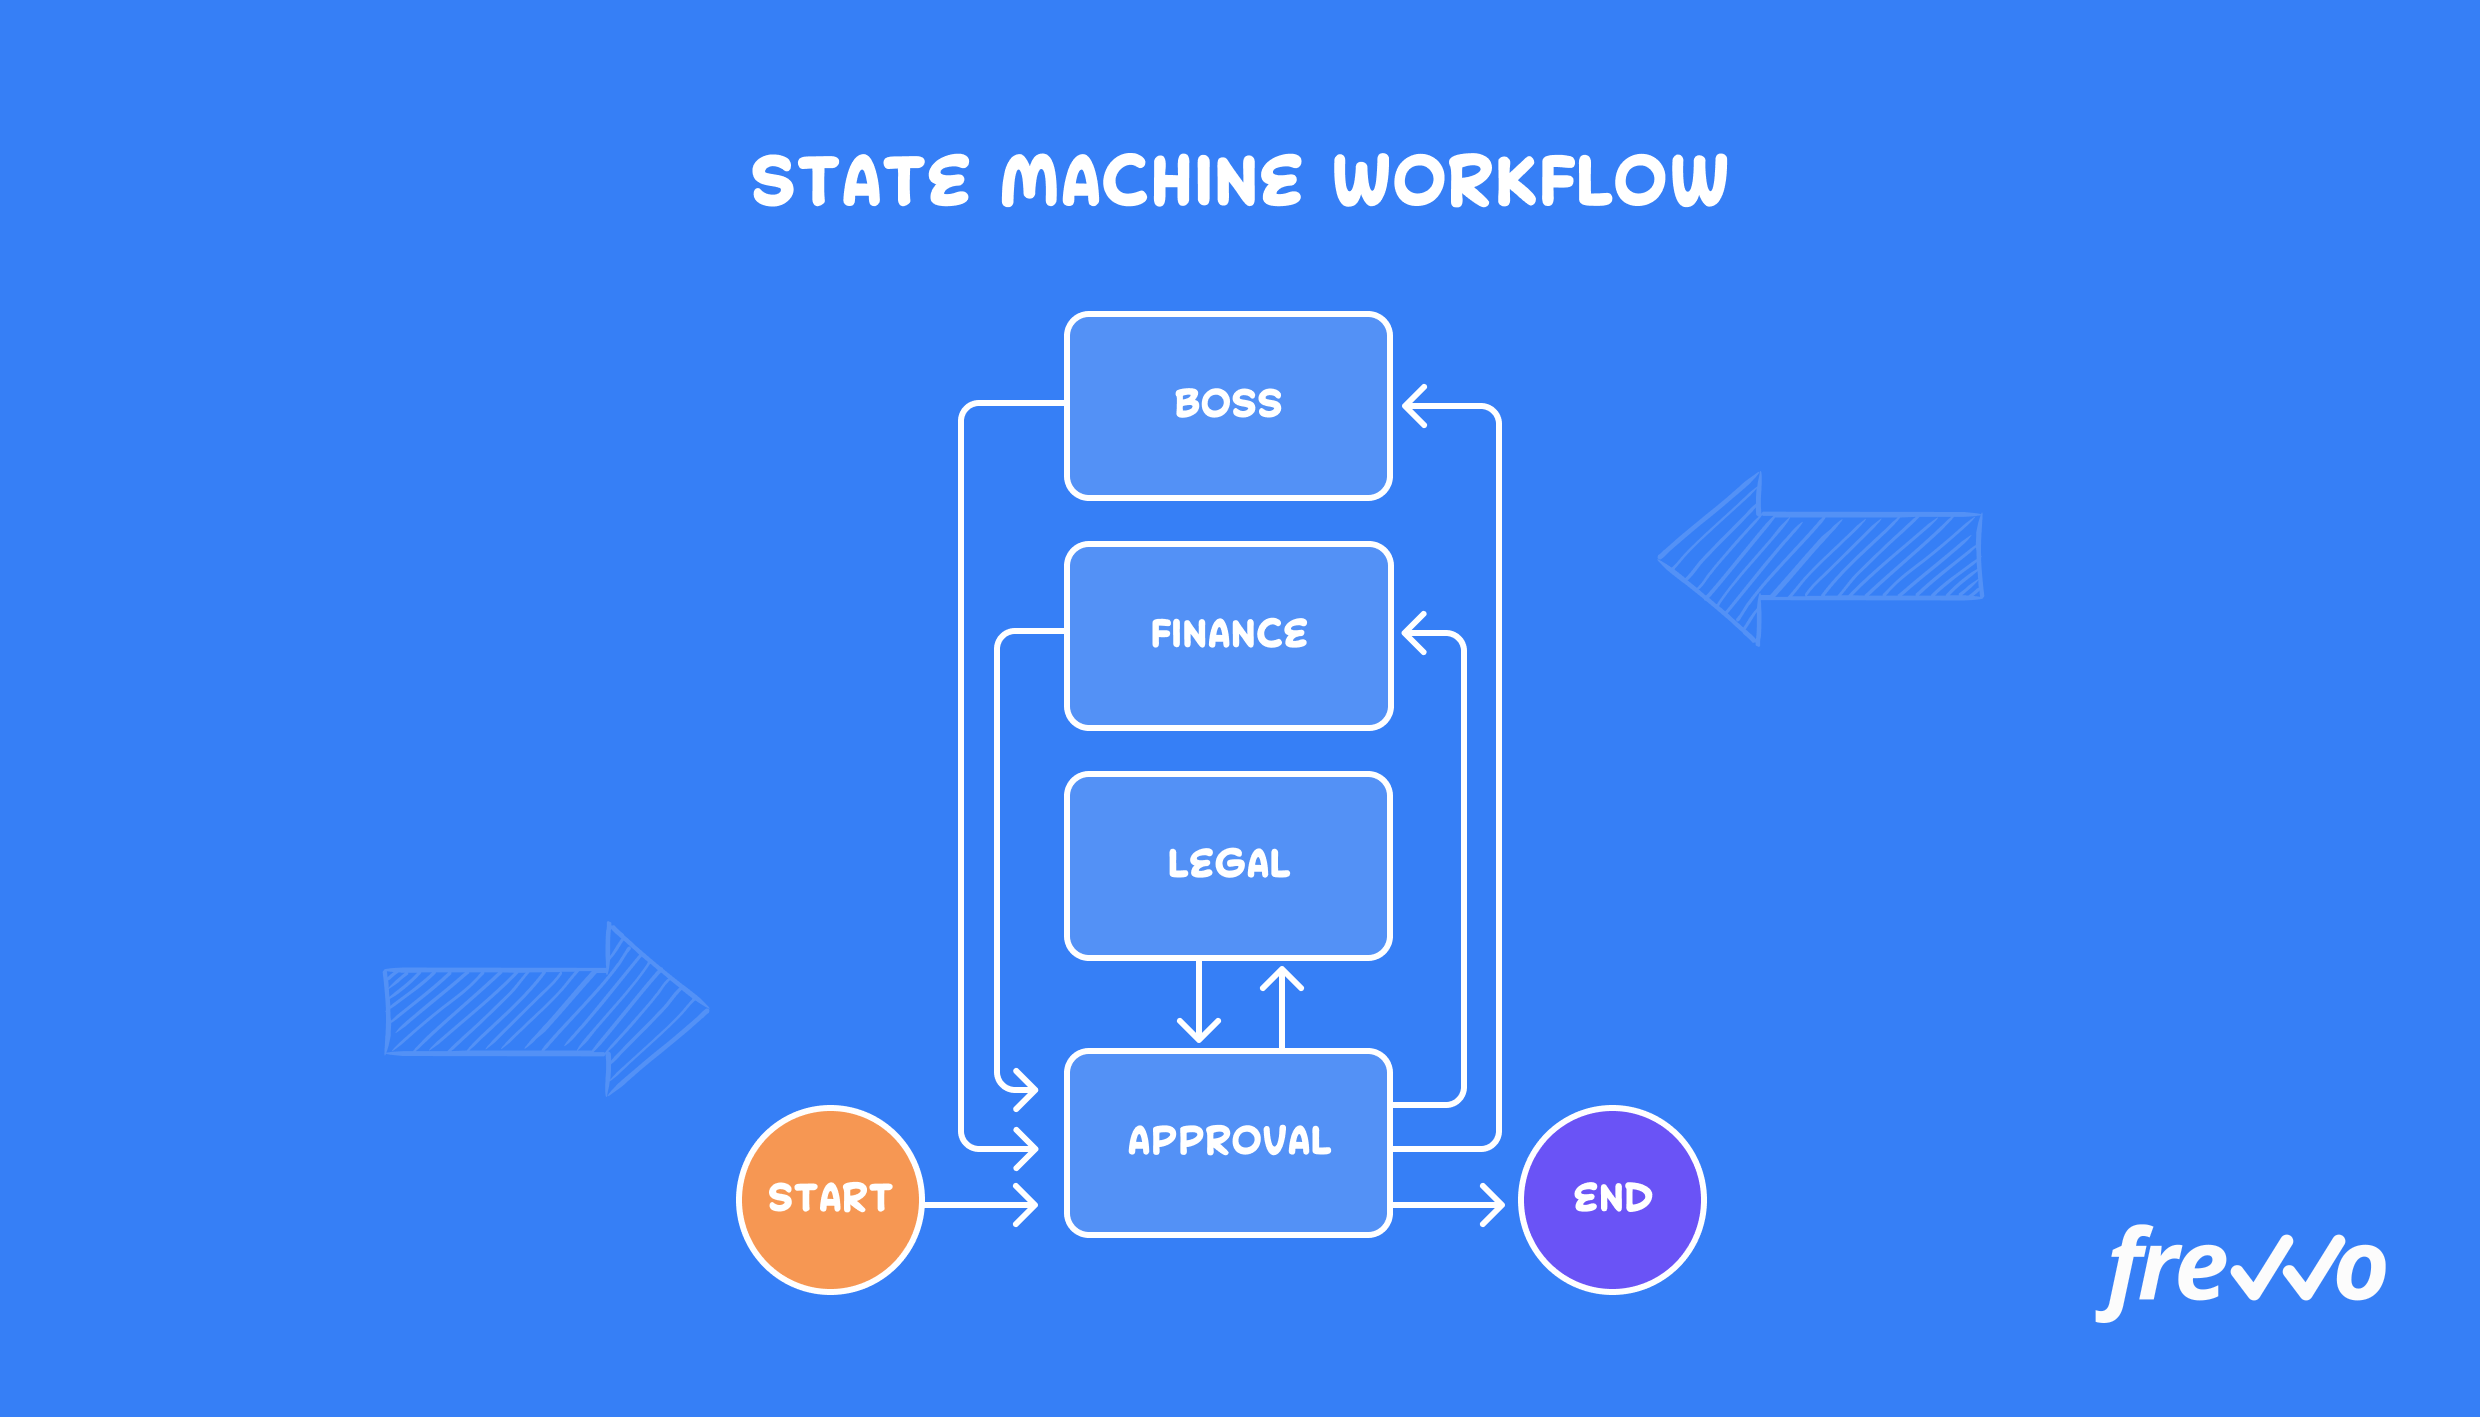 State machine workflow example